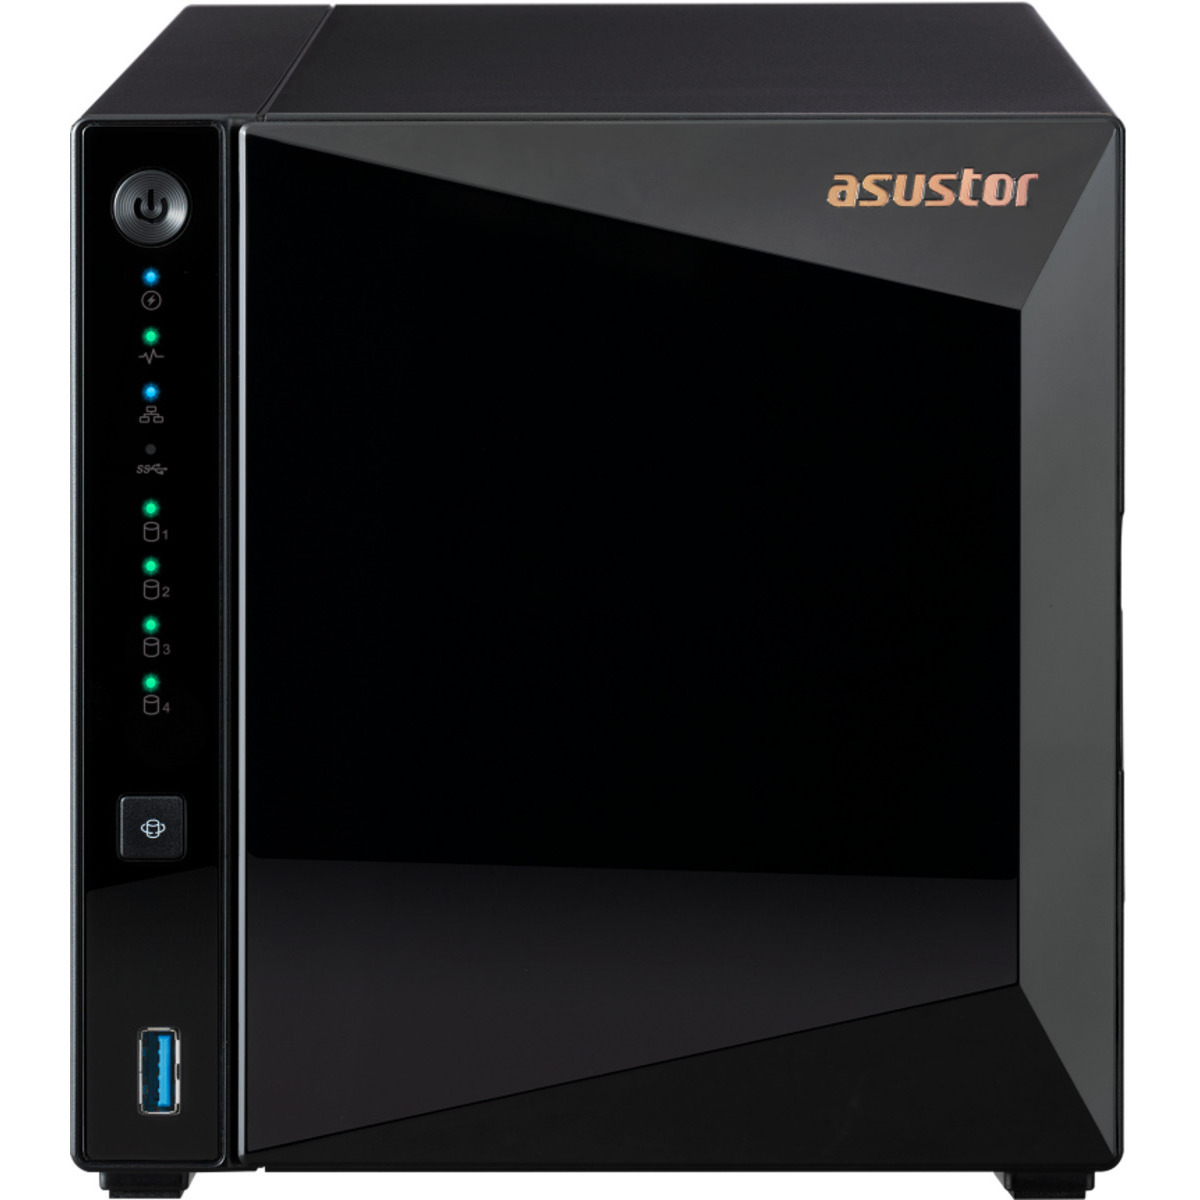 ASUSTOR DRIVESTOR 4 Pro Gen2 AS3304T v2 24tb 4-Bay Desktop Personal / Basic Home / Small Office NAS - Network Attached Storage Device 4x6tb Western Digital Red Plus WD60EFPX 3.5 5640rpm SATA 6Gb/s HDD NAS Class Drives Installed - Burn-In Tested - ON SALE DRIVESTOR 4 Pro Gen2 AS3304T v2